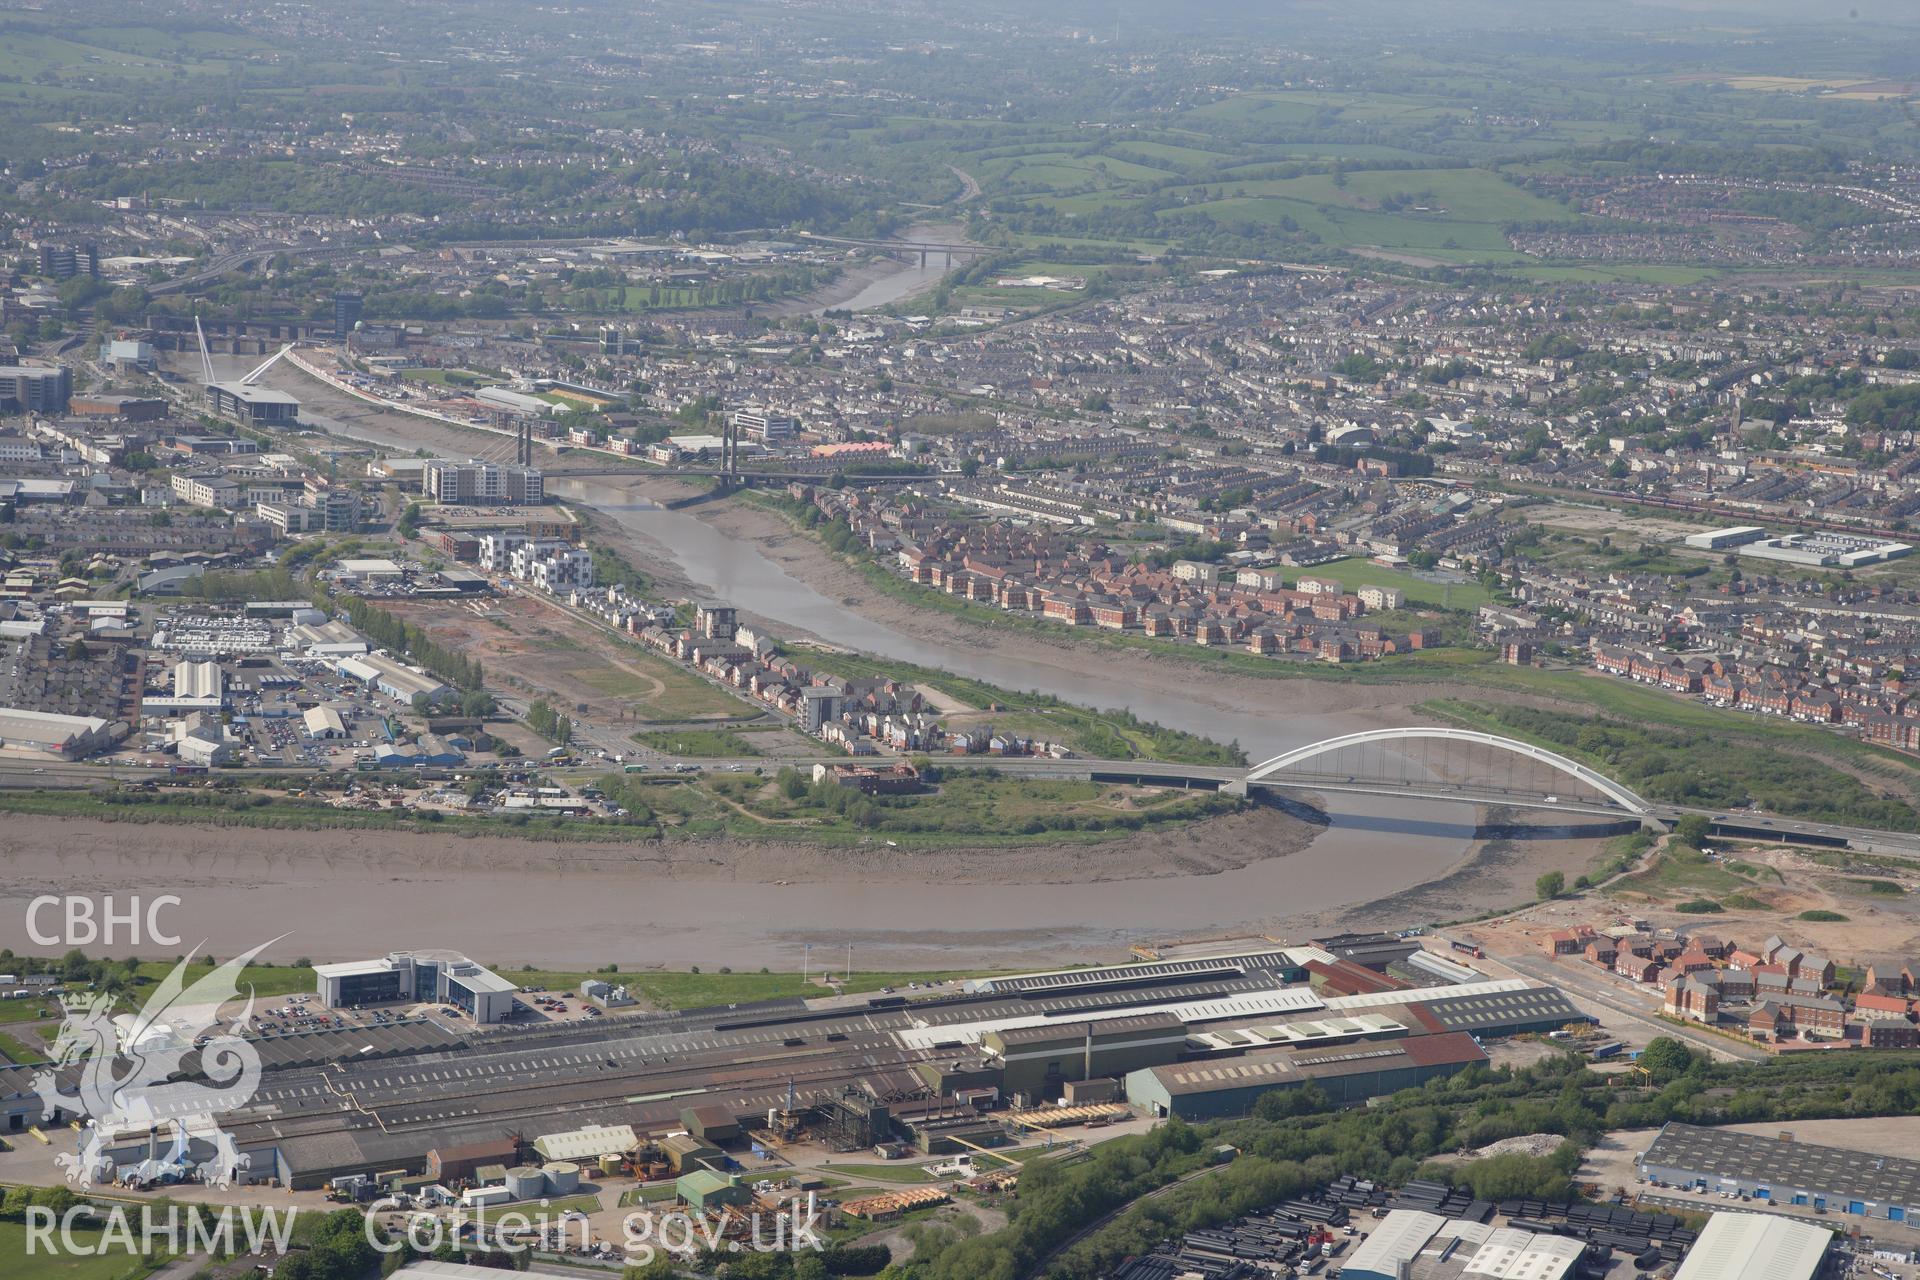 RCAHMW colour oblique photograph of Newport, from the south-east. Taken by Toby Driver on 22/05/2012.